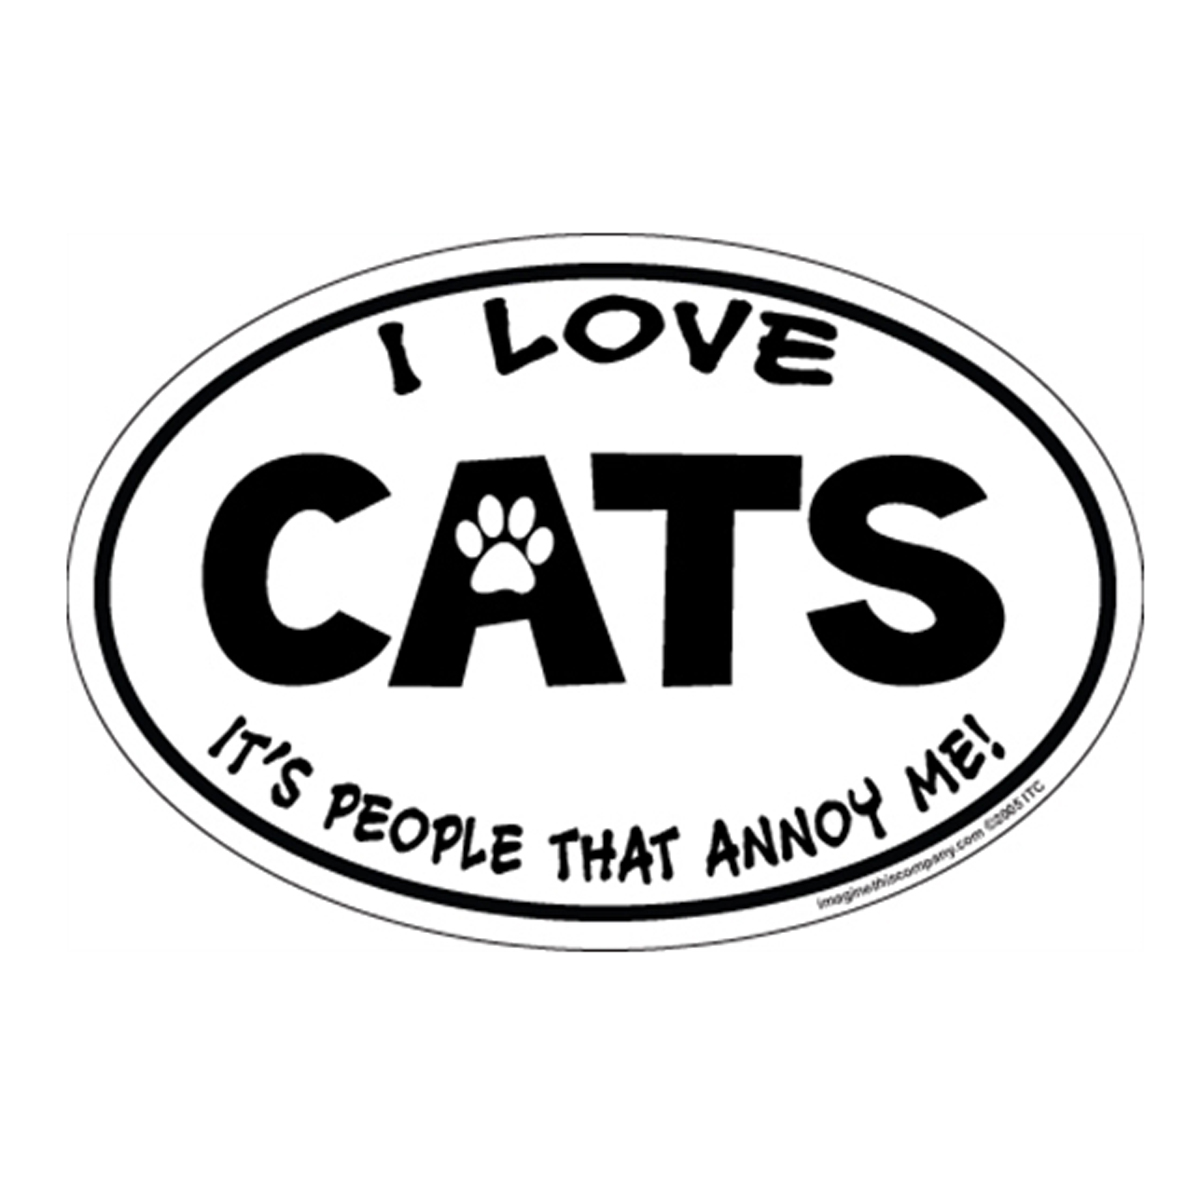 I Love Cats...It's People That Annoy Me! Oval Magnet